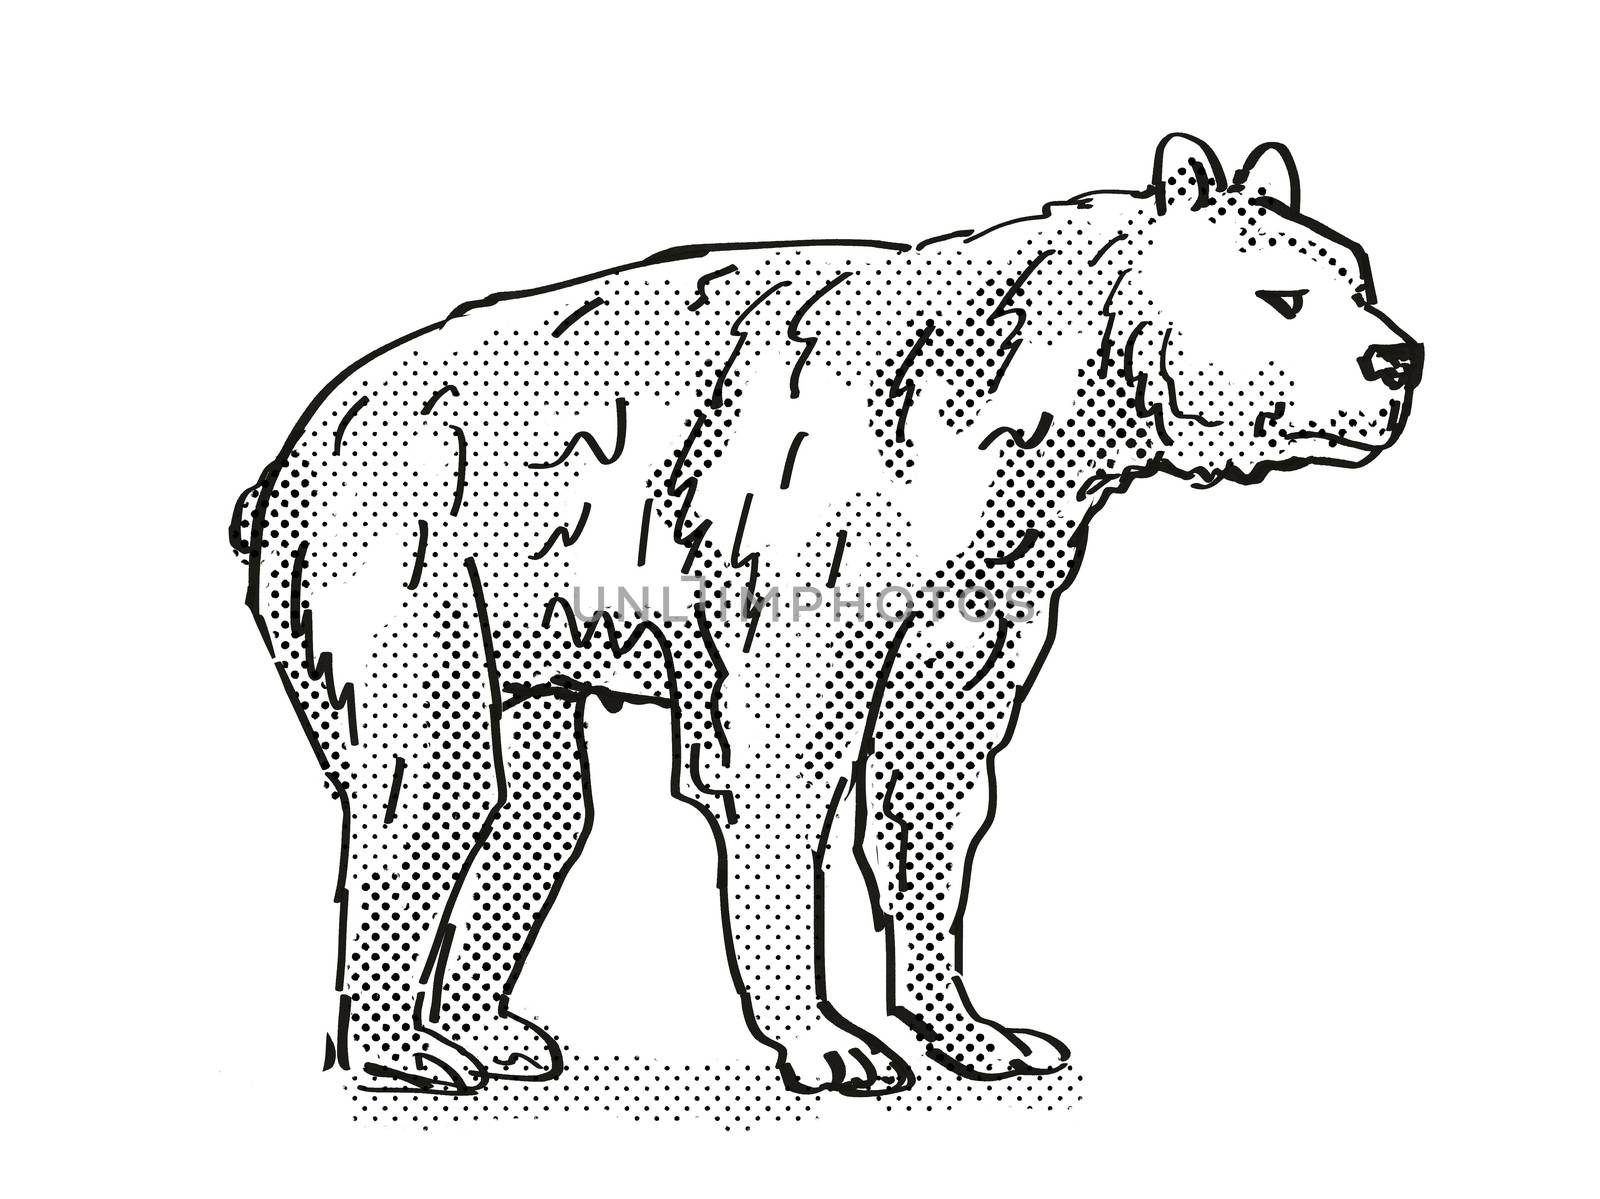 Retro cartoon style drawing of a Short-Faced Bear, an extinct North American wildlife species on isolated background done in black and white full body.